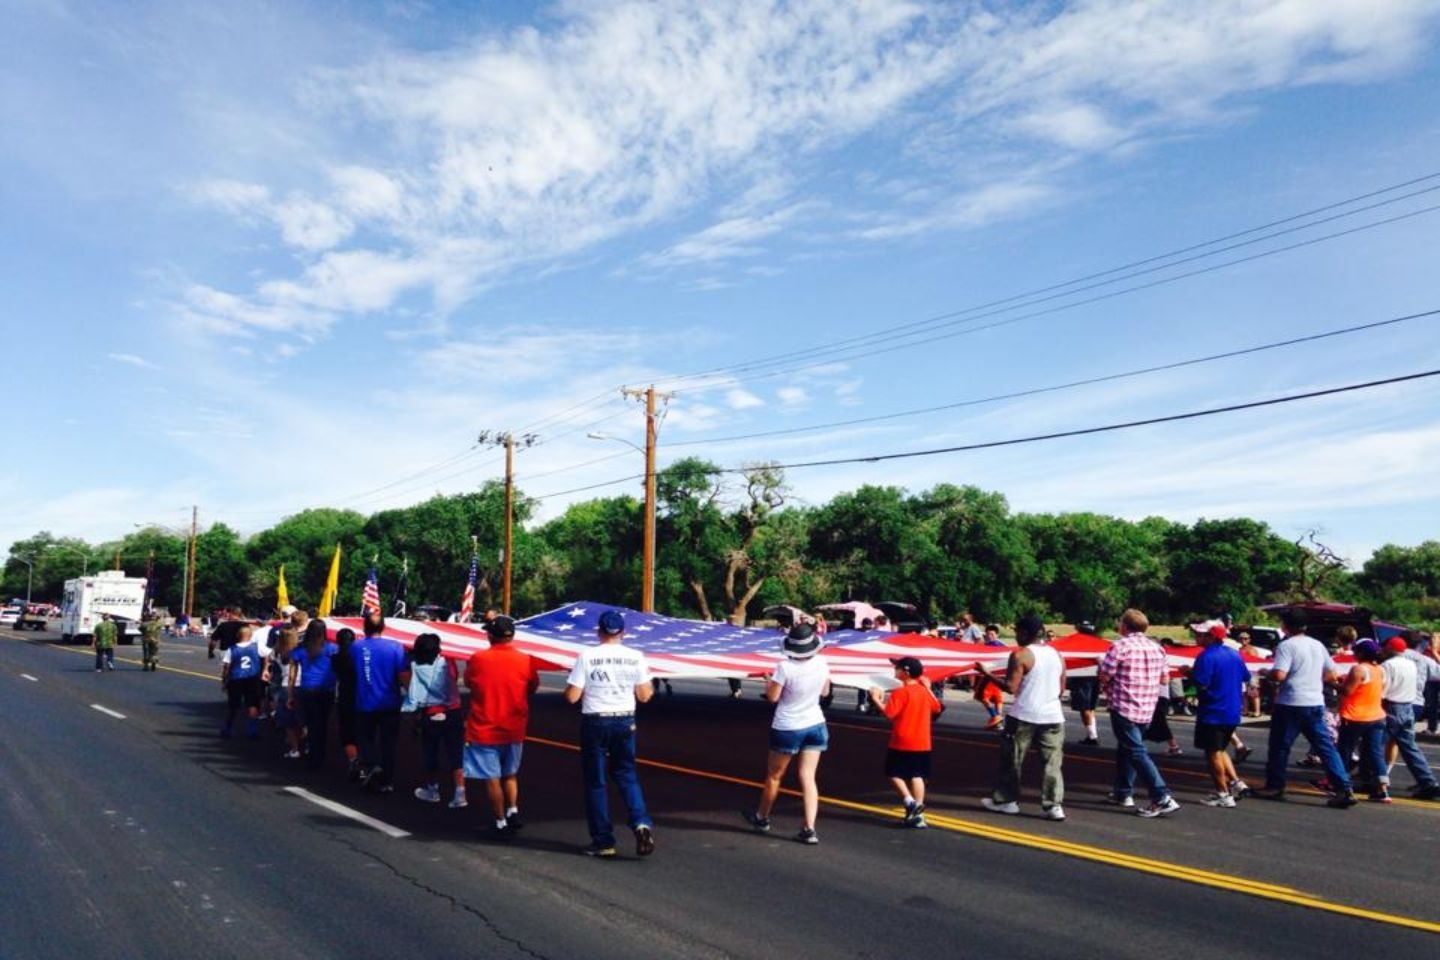 Post's Large 30'x6' US Flag in the 4th of July Parade